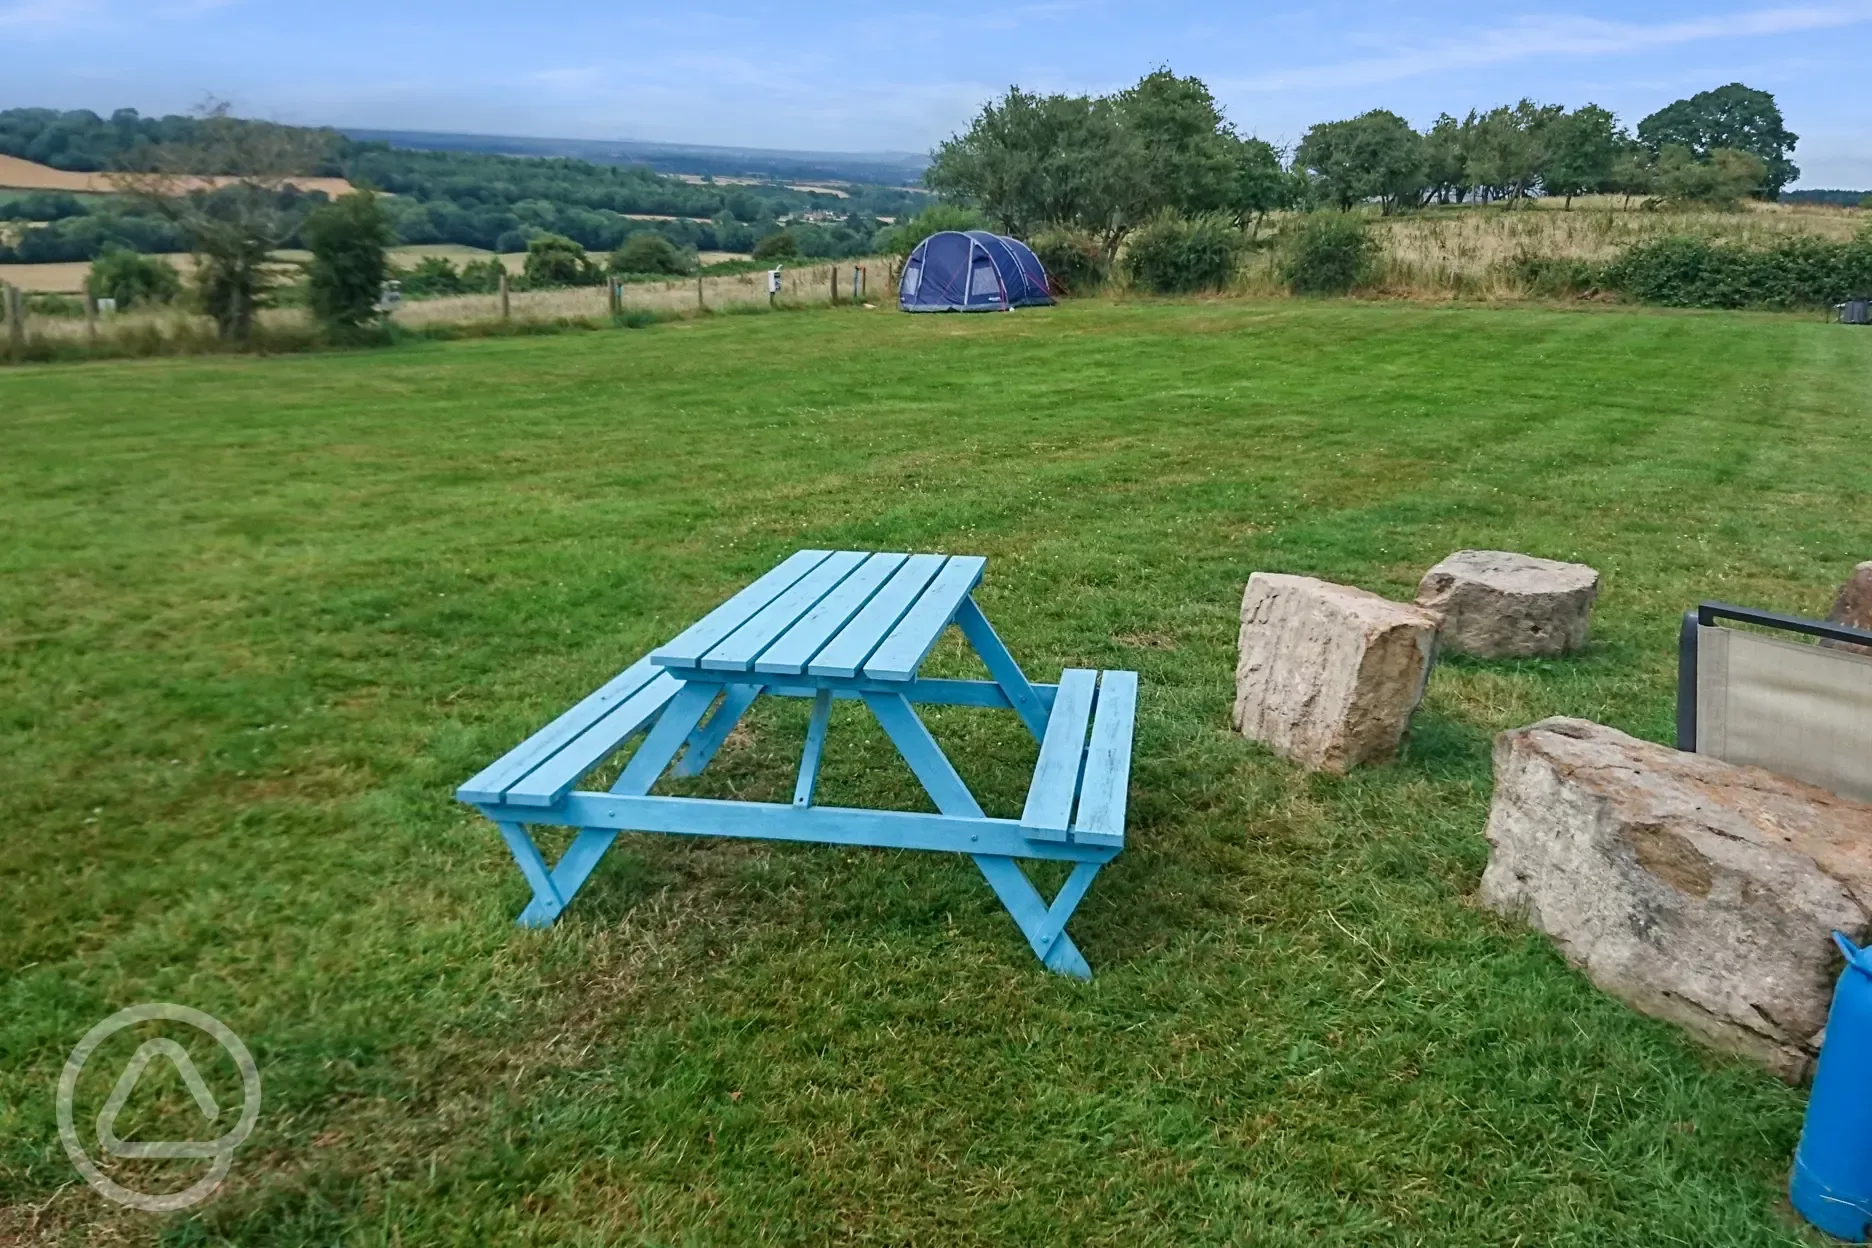 Picnic tables around the site